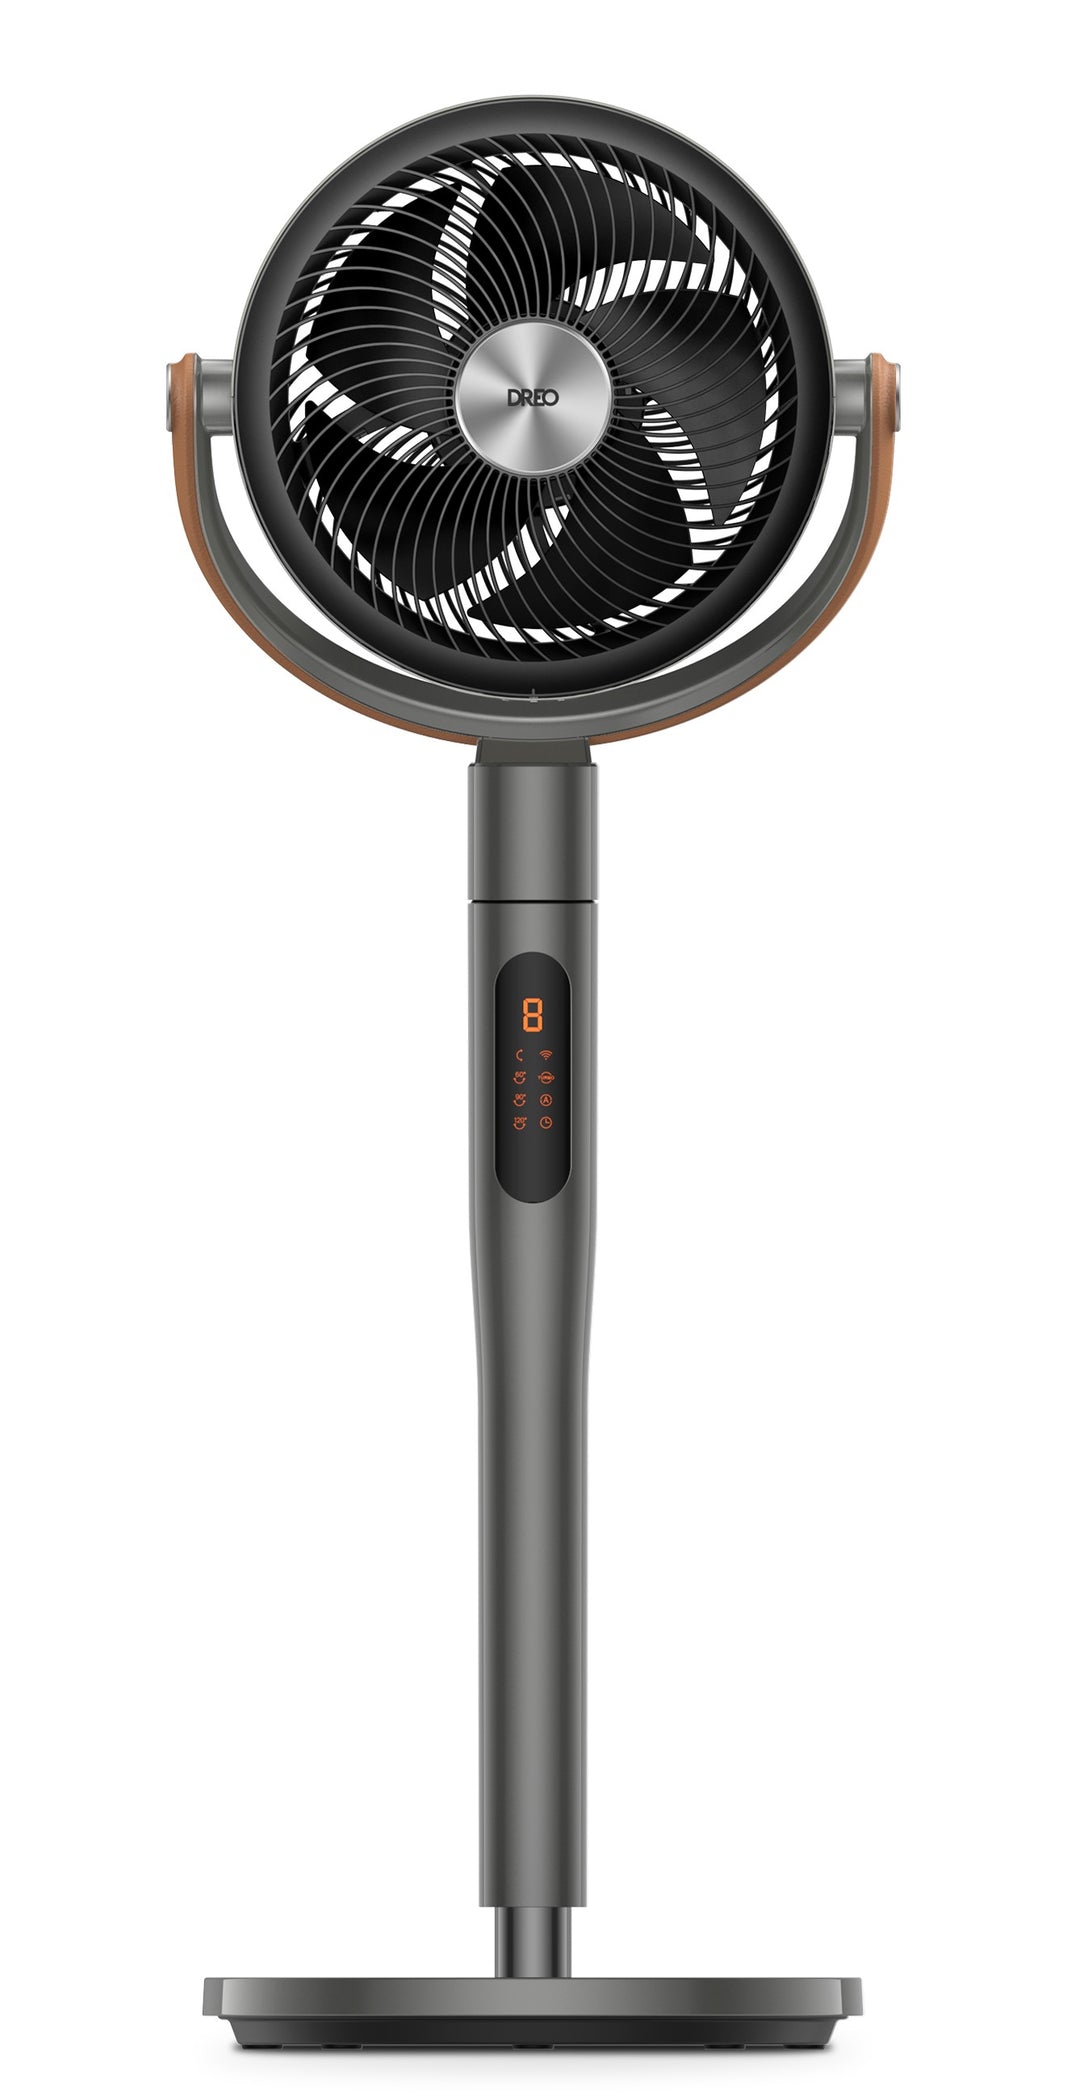 Dreo - Pedestal Fan with Remote, 120° + 105°Smart Oscillating Floor Fans with Wi-Fi/Voice Control, Works with Alexa/Google - Gray_6